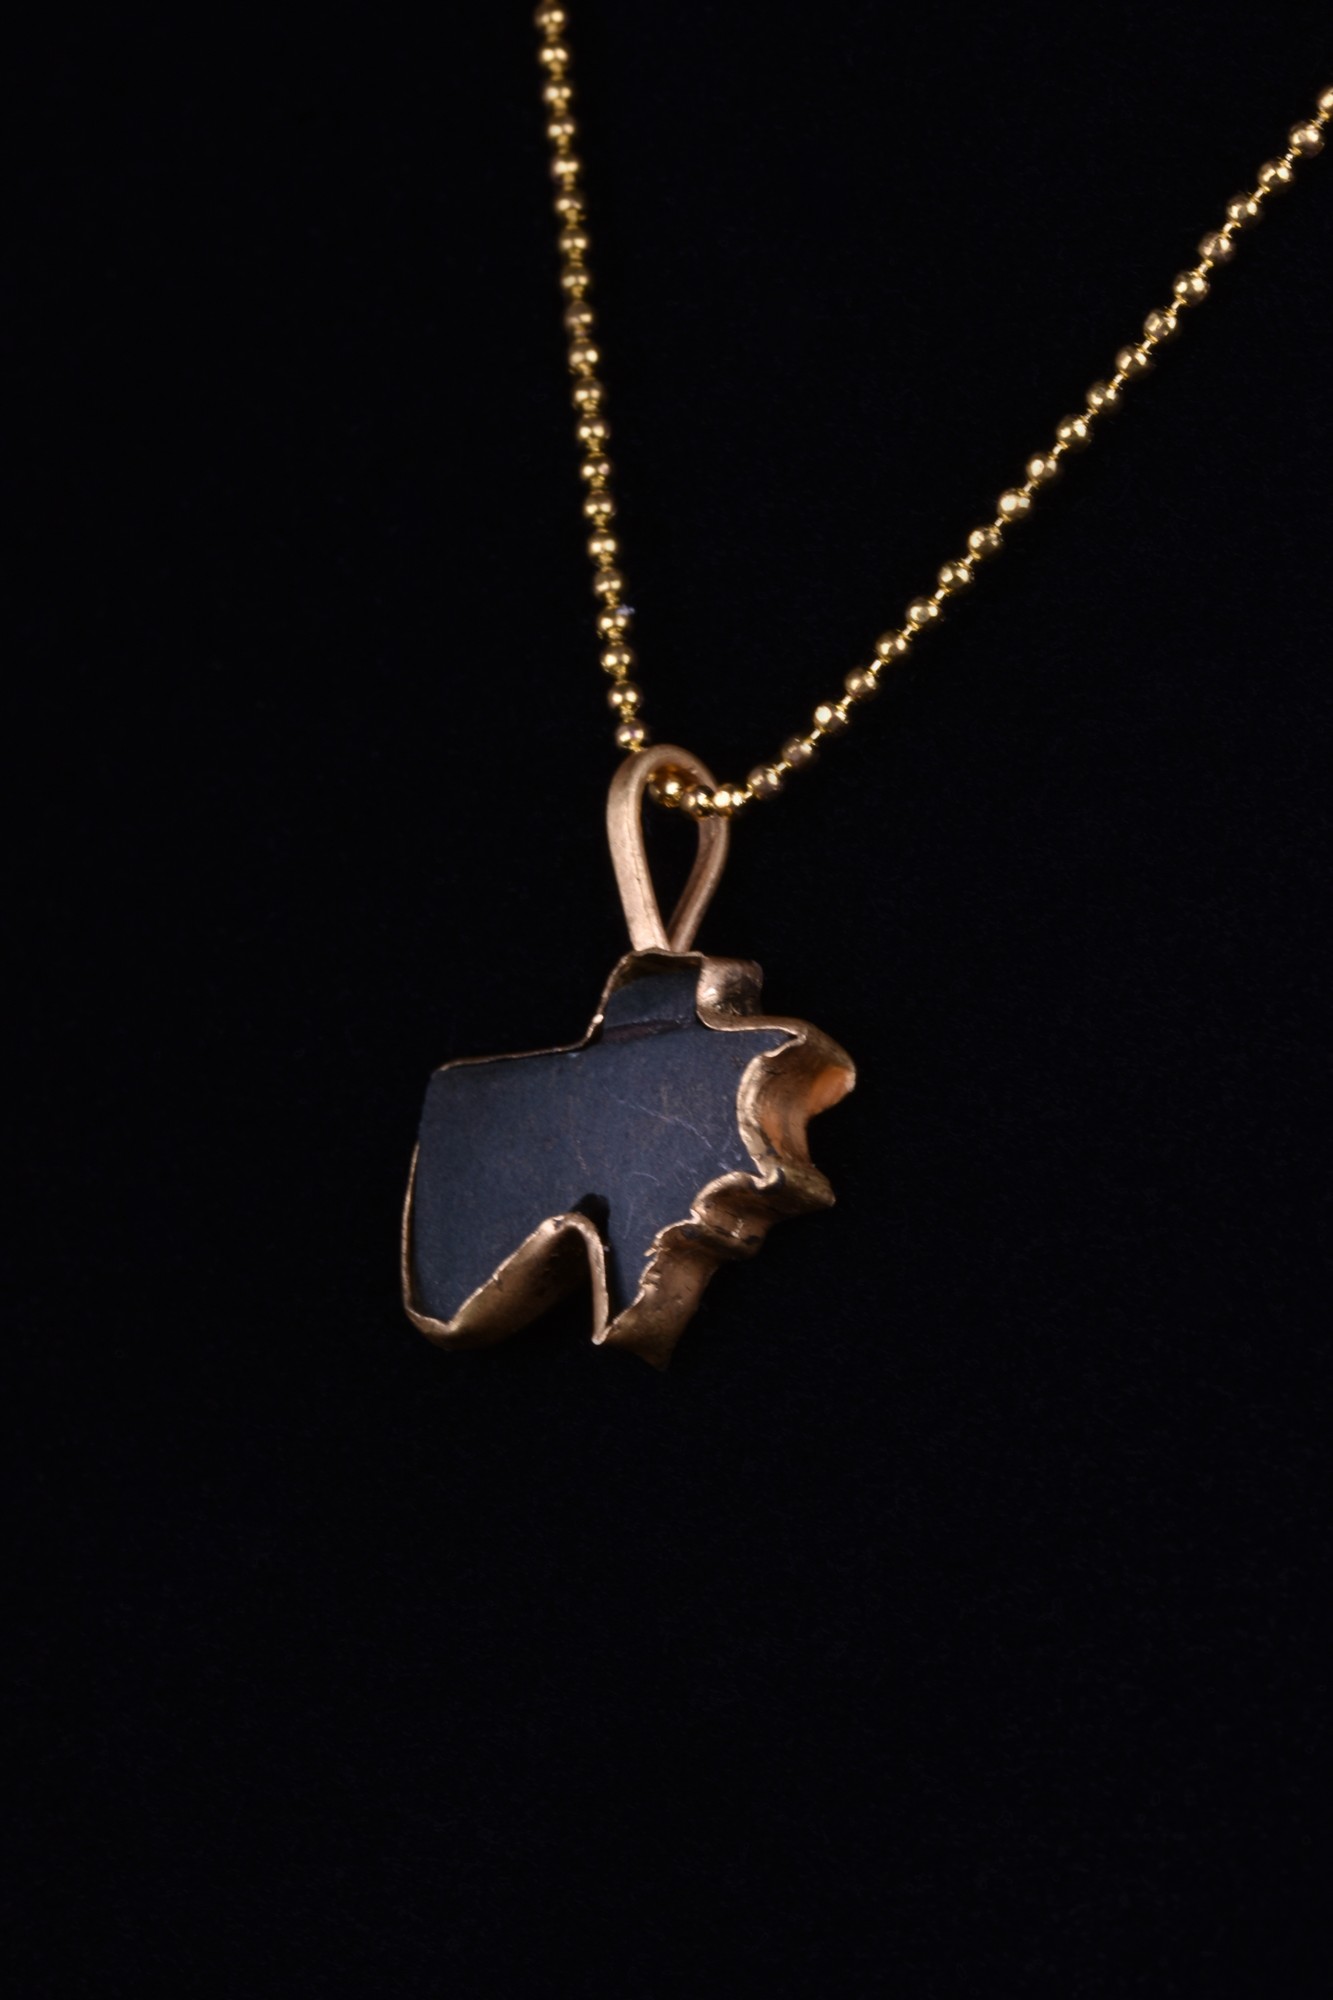 ANCIENT EGYPTIAN EYE OF HORUS IN GOLD PENDANT - Image 2 of 4